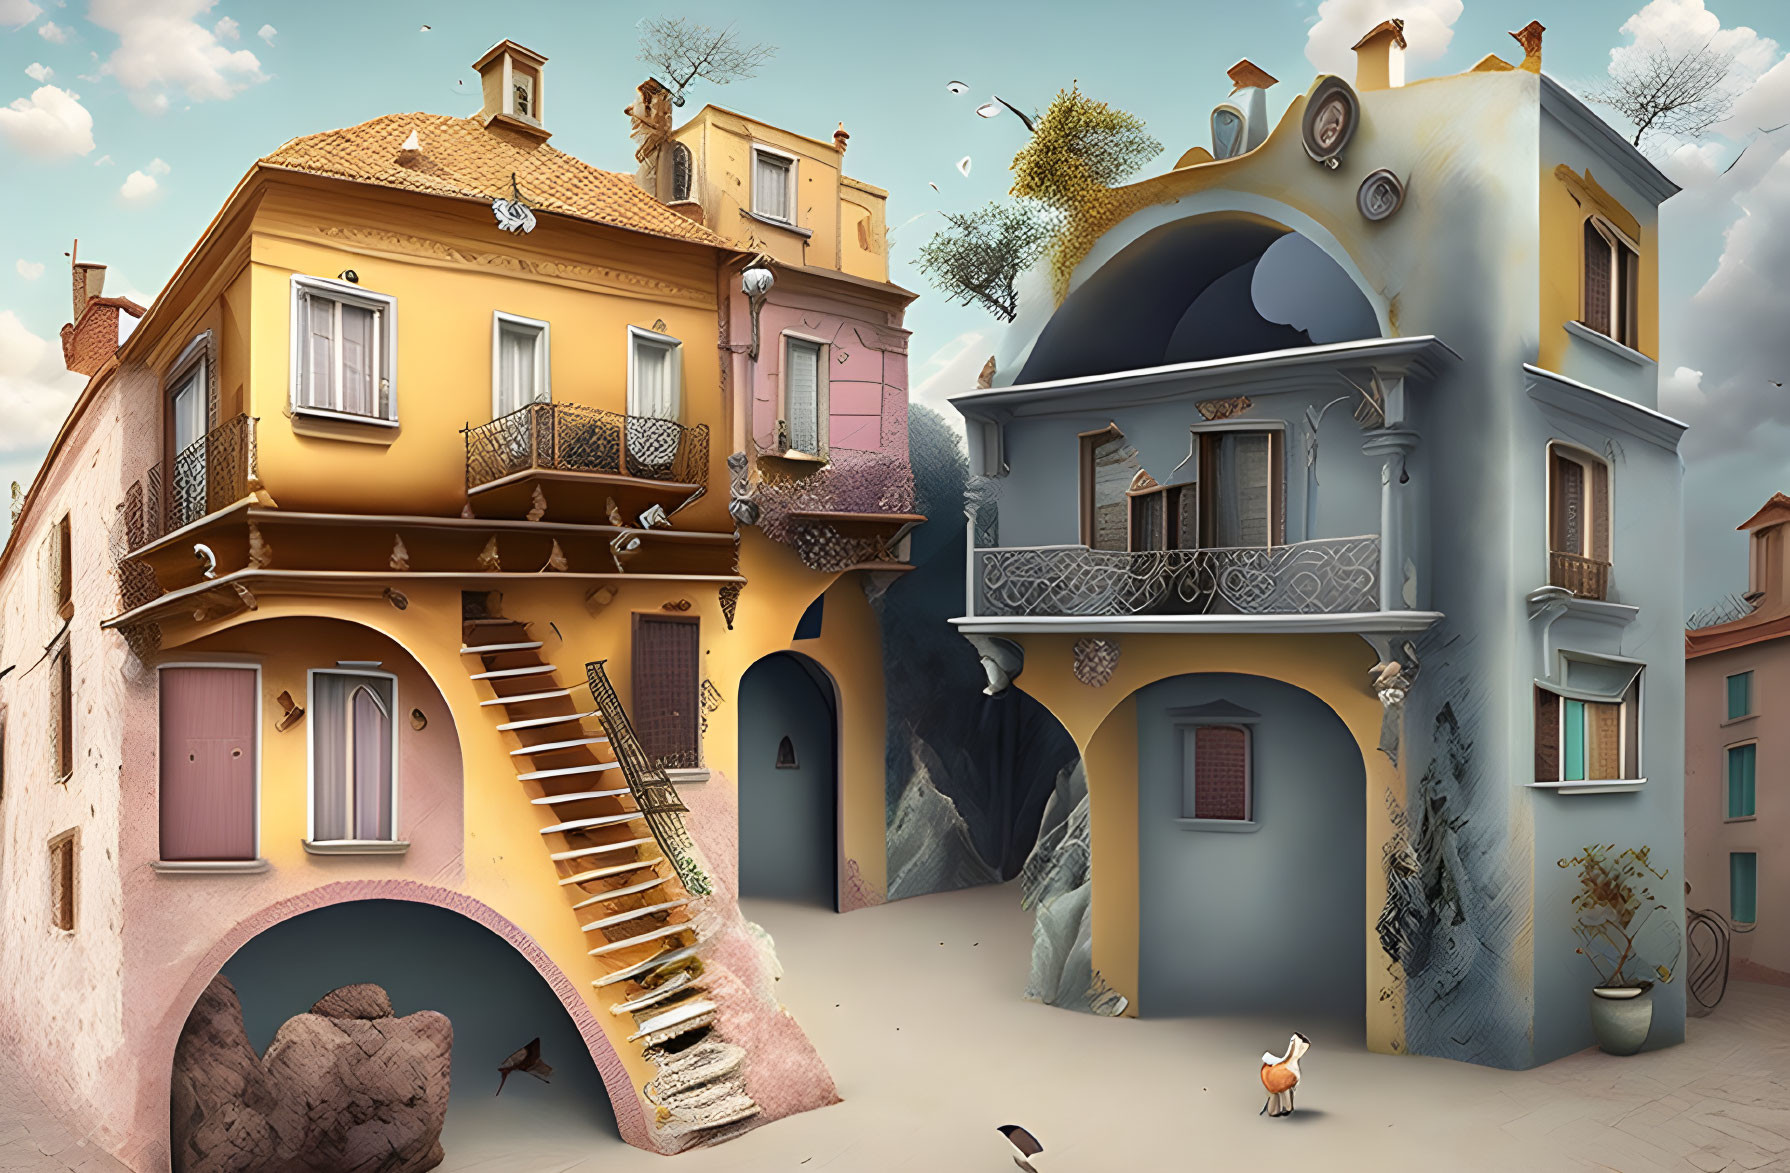 Colorful surreal houses with floating stairs in dreamlike townscape